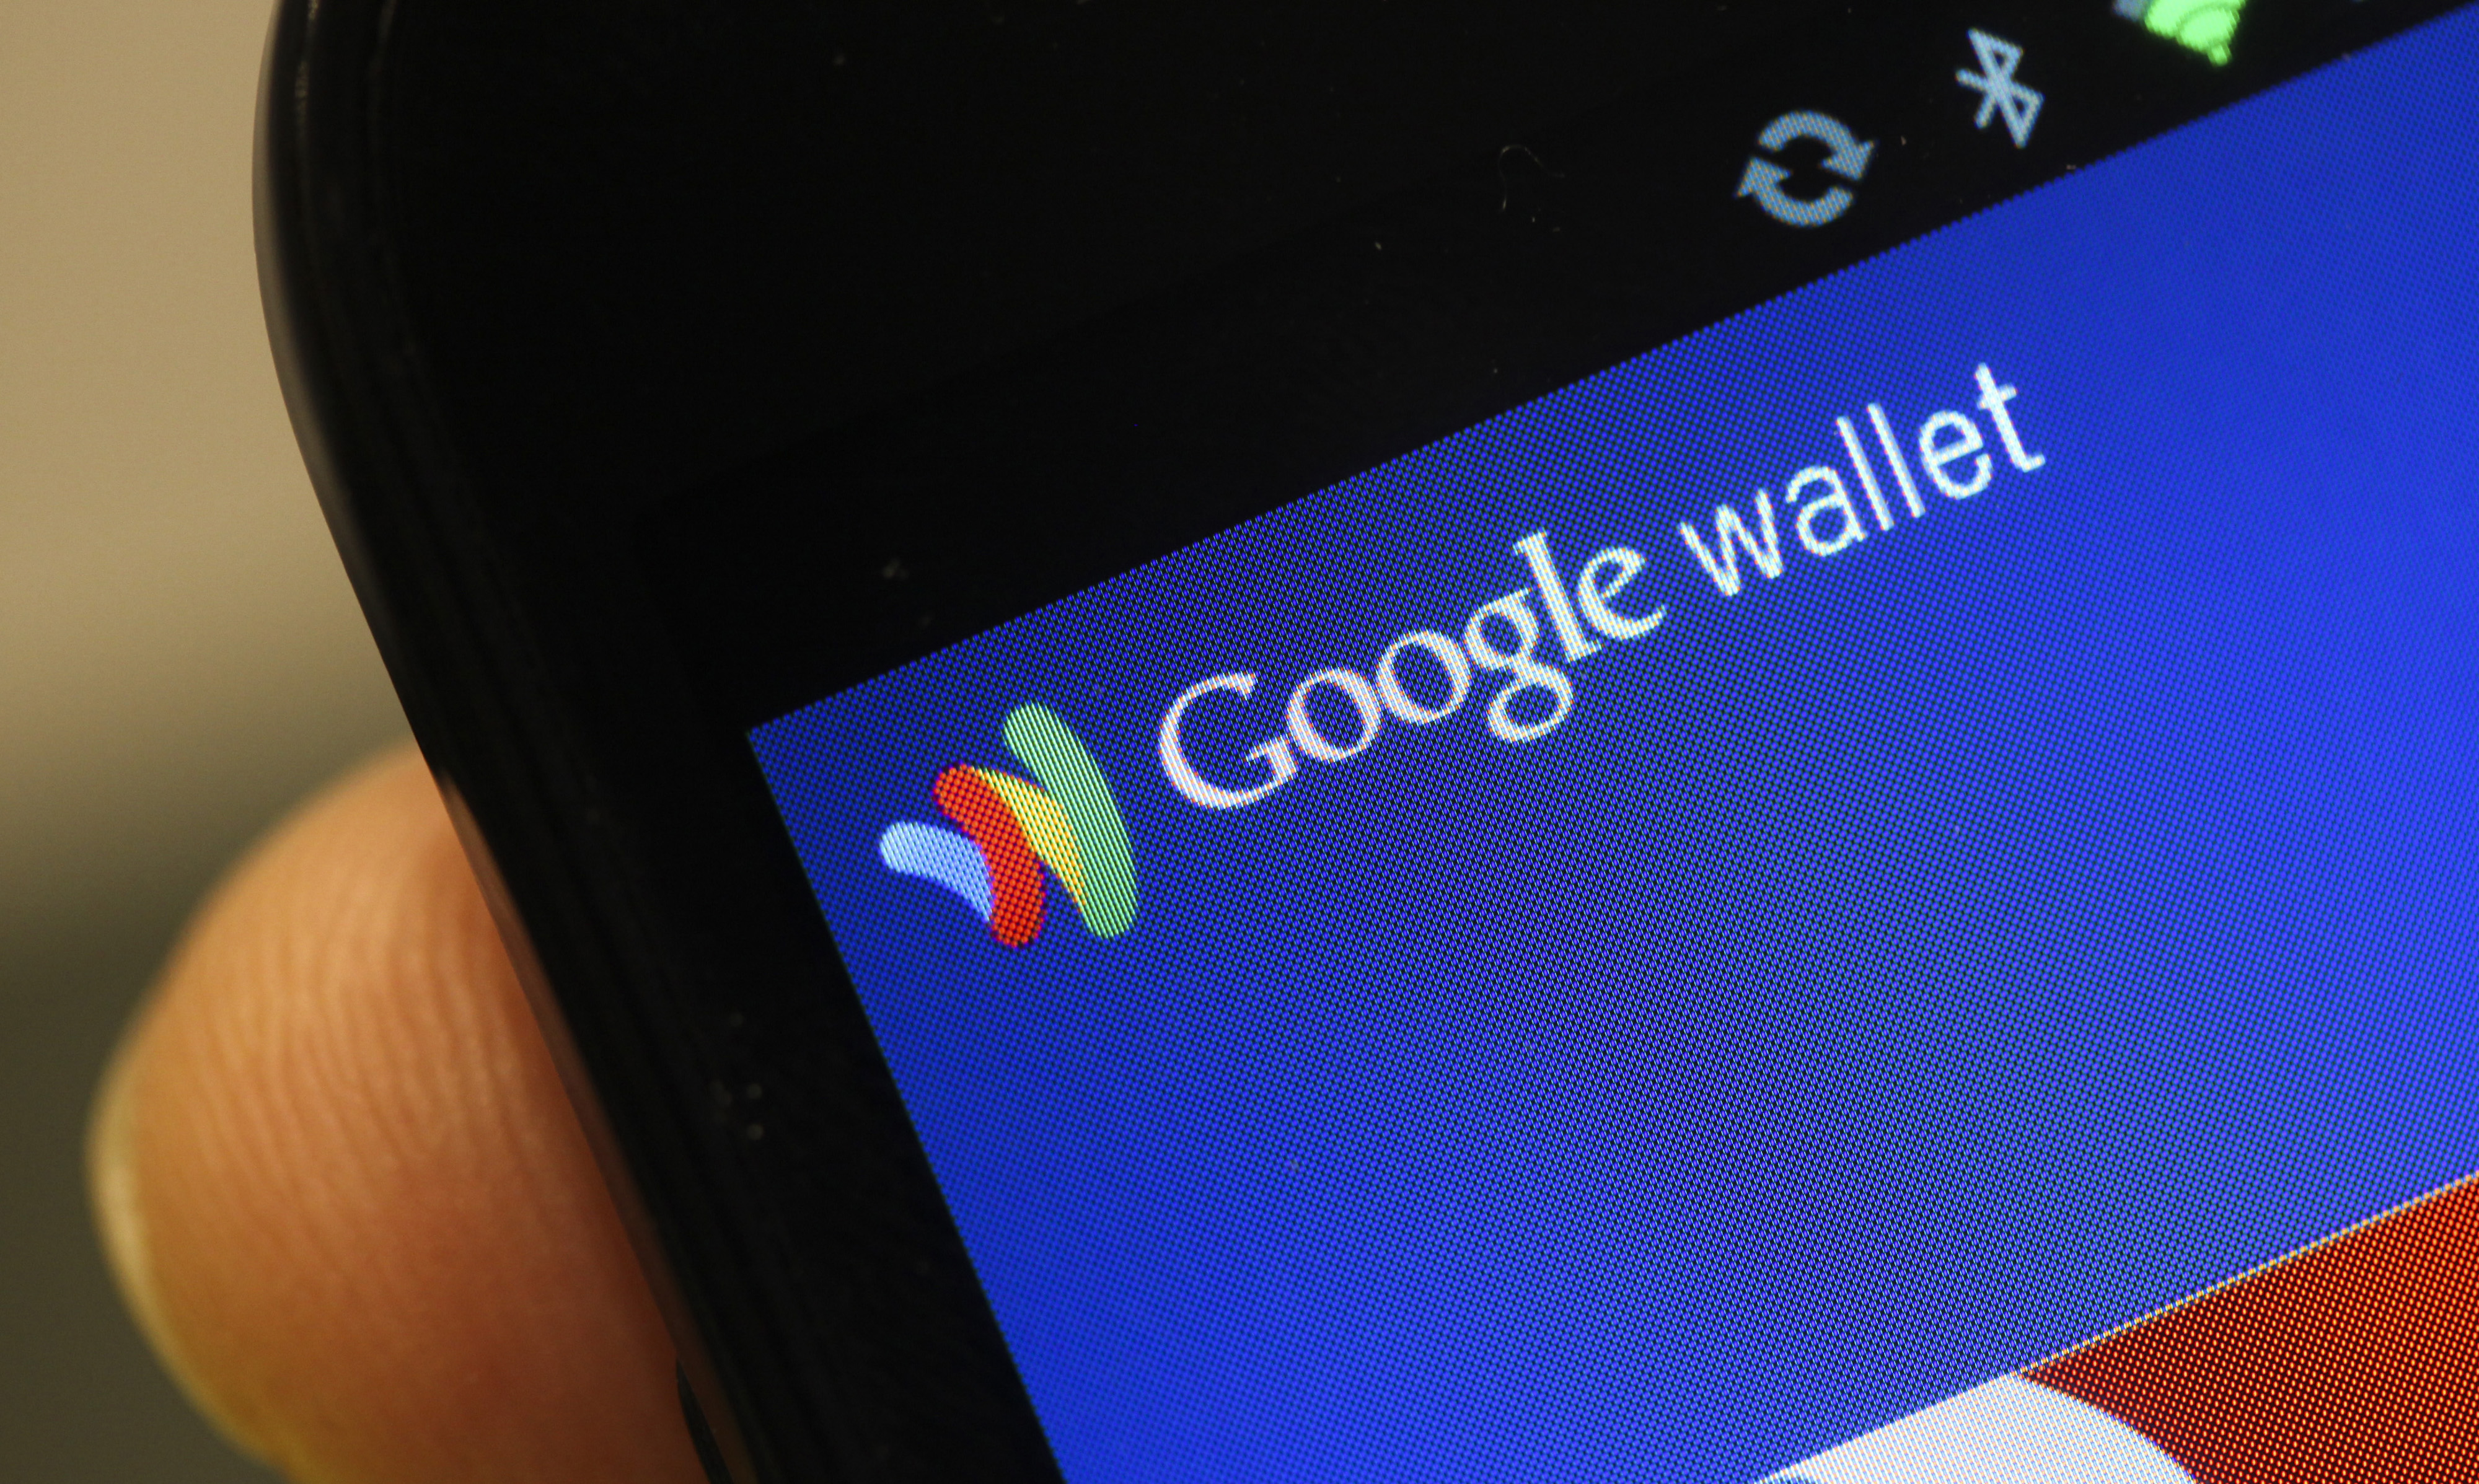 The Google Inc. Mobile Wallet application is displayed on a smartphone screen at the Mobile World Congress in Barcelona, Spain, on Feb. 29, 2012. (Bloomberg via Getty Images)